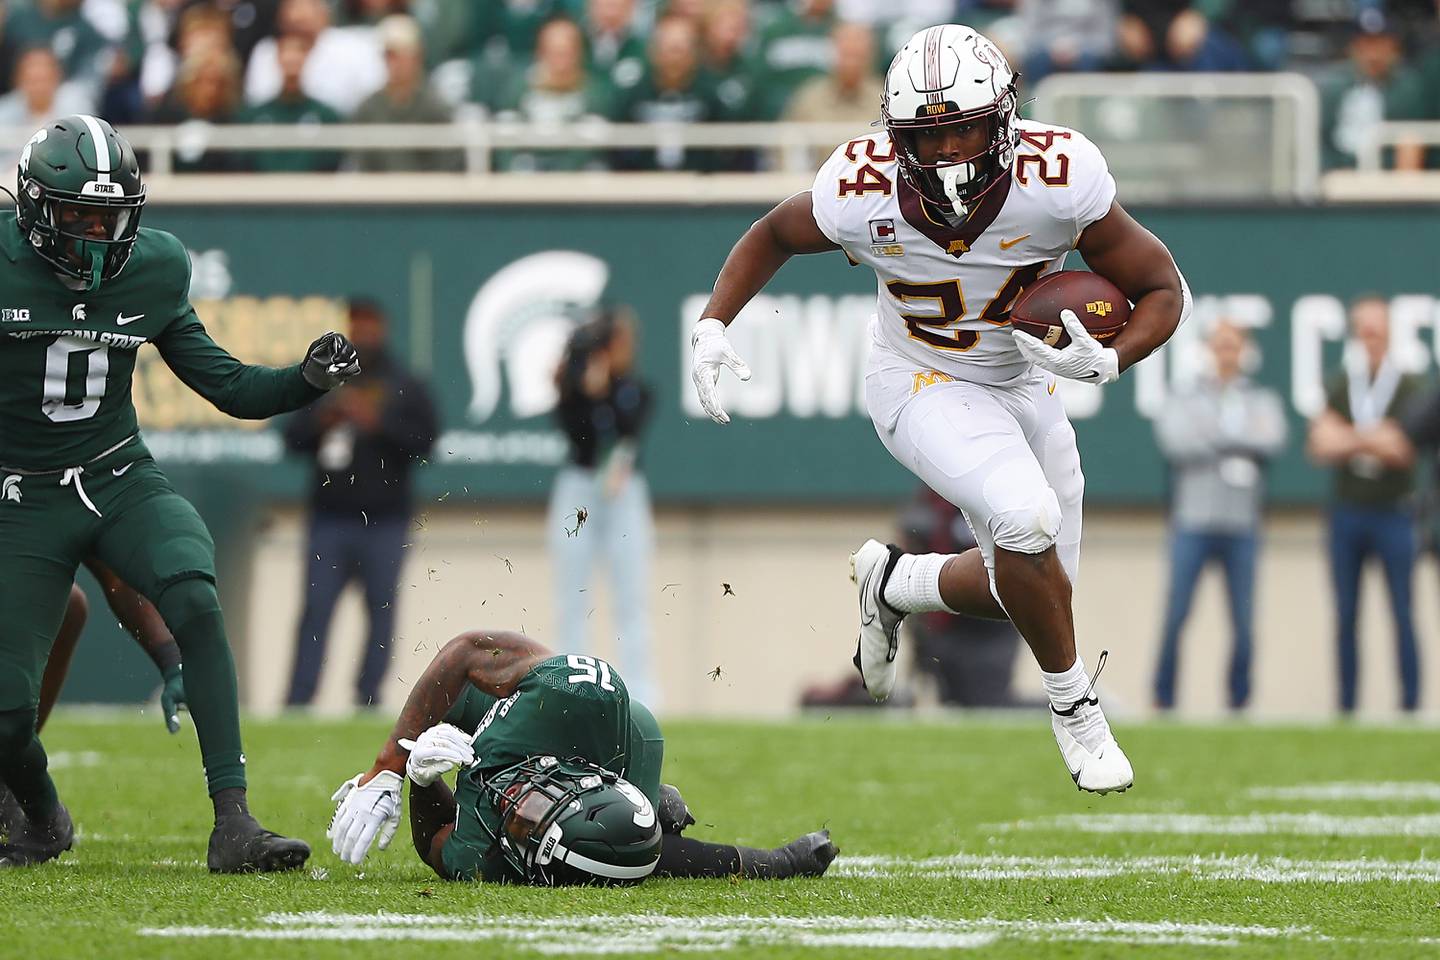 Minnesota's Mohamed Ibrahim skips through a tackle attempt by Michigan State's Angelo Grose in the first half at Spartan Stadium on Sept. 24 in East Lansing, Michigan.